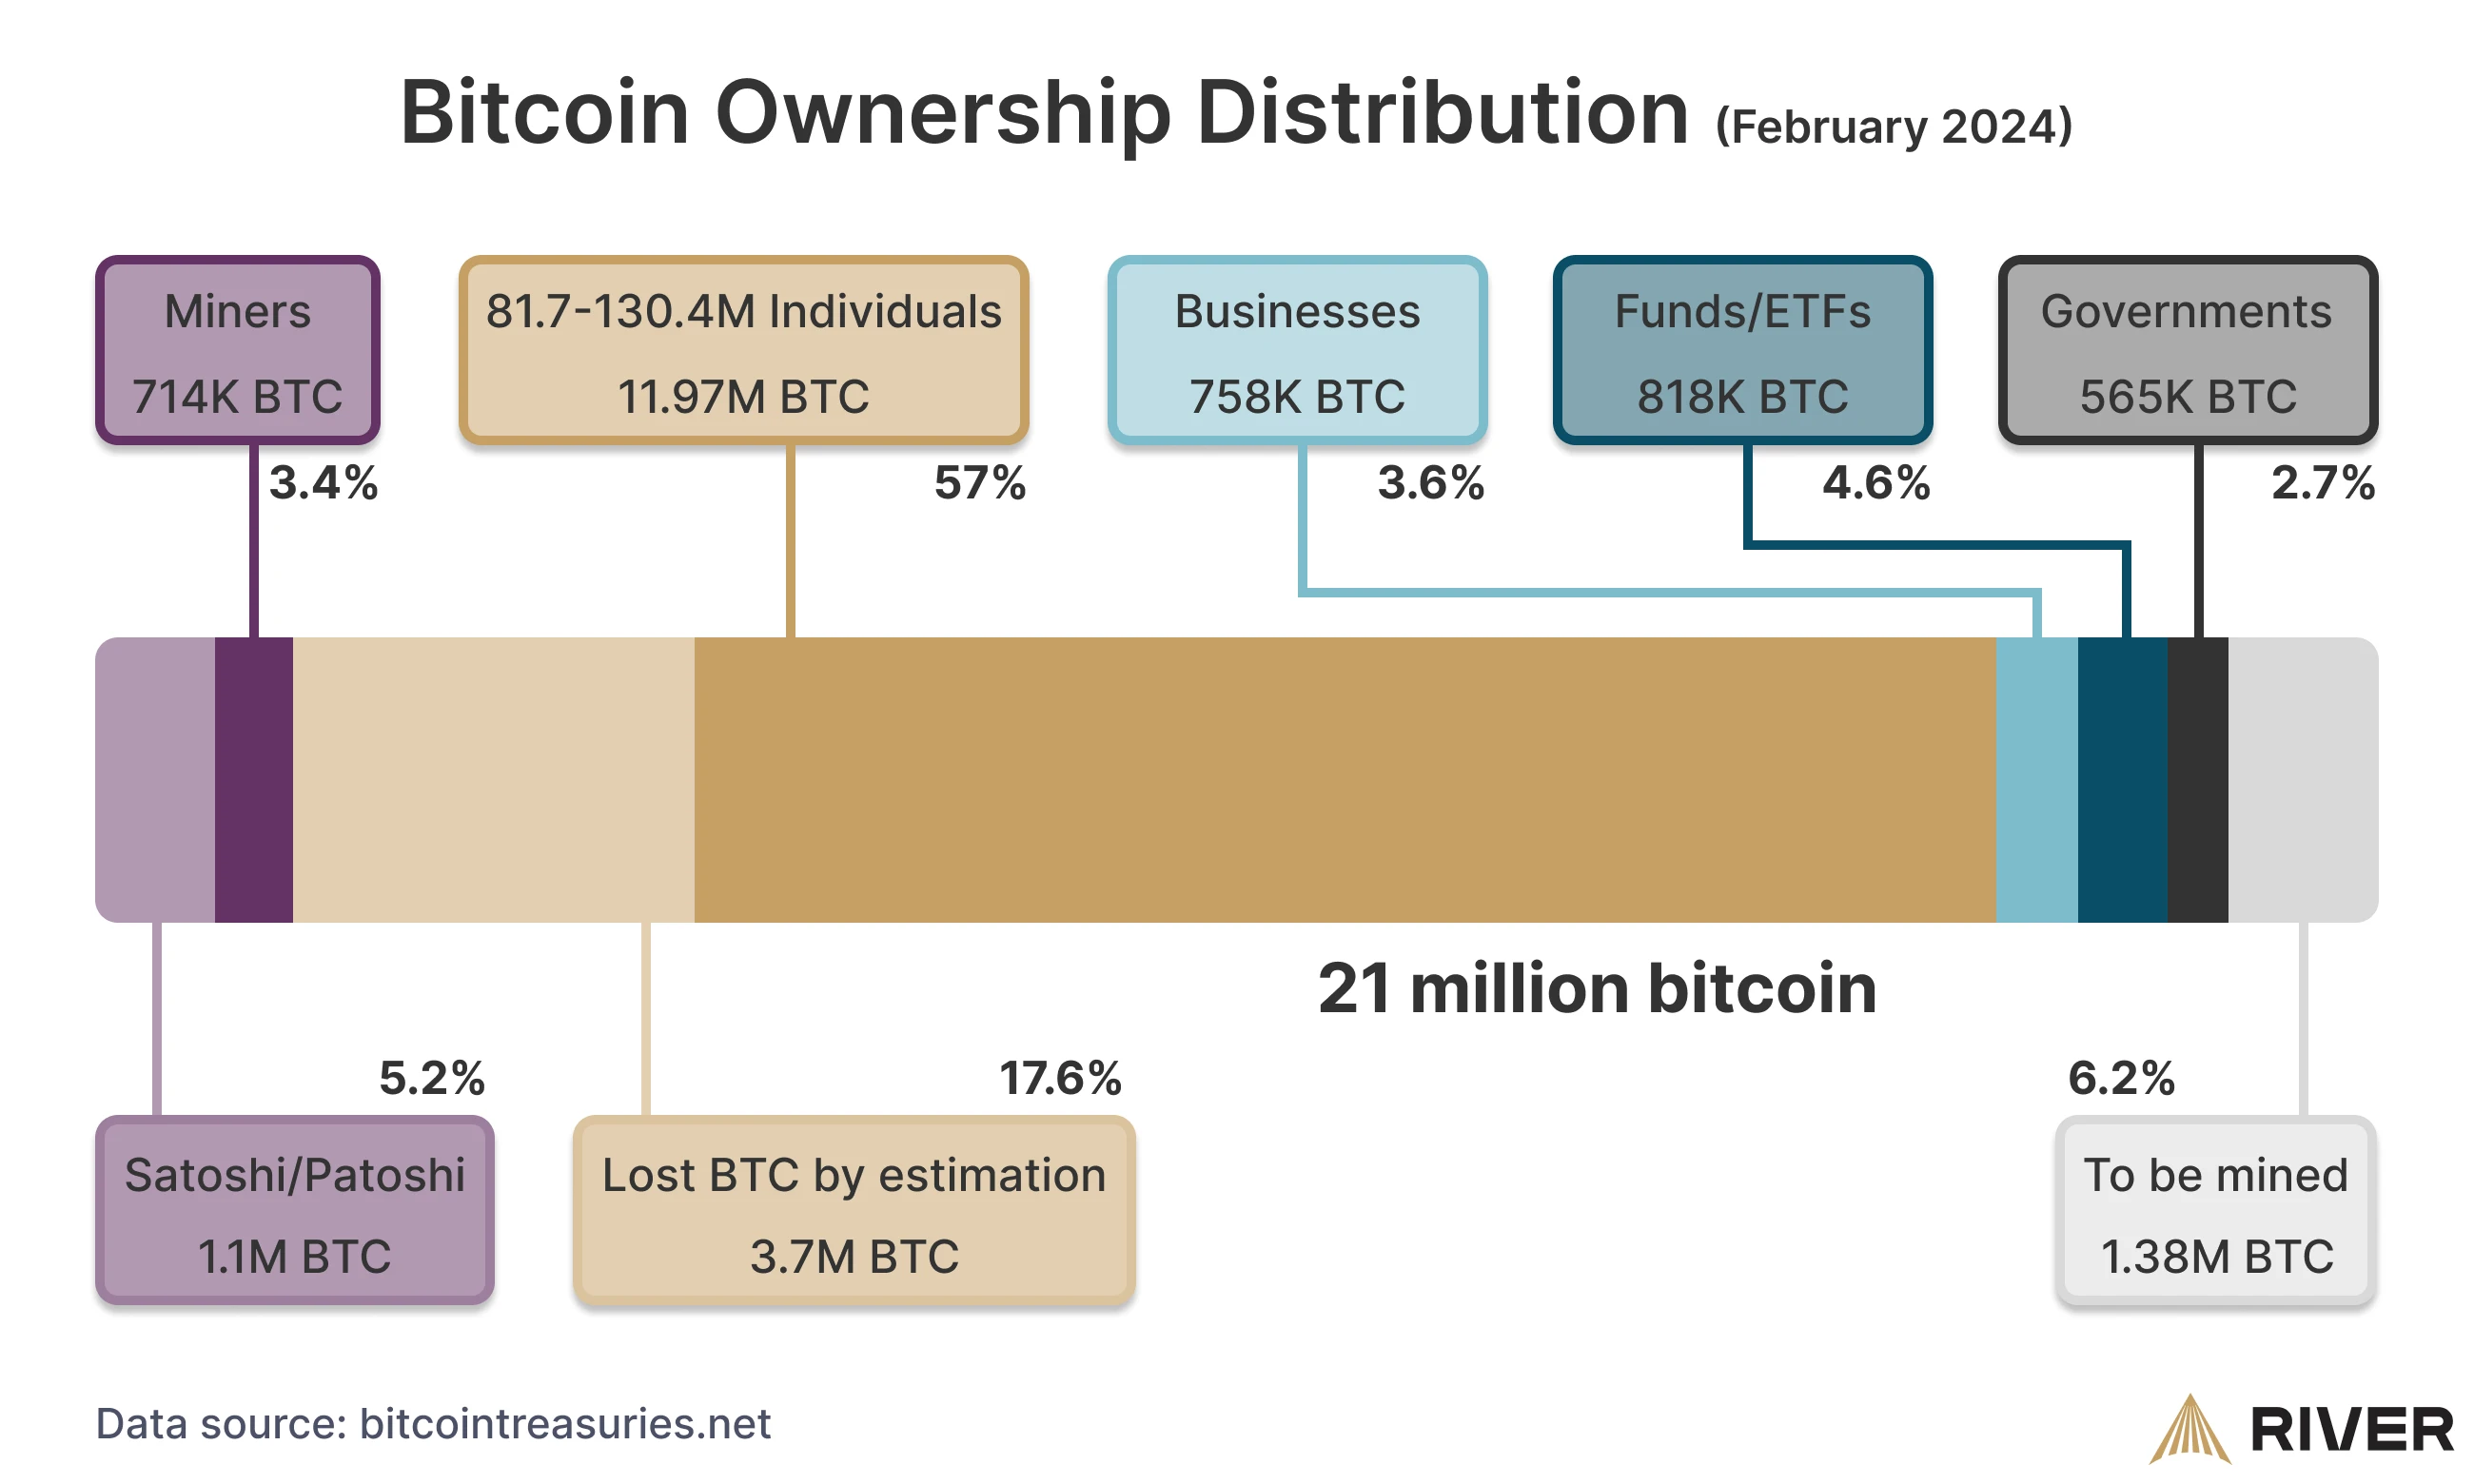 The image is an infographic detailing the distribution of Bitcoin ownership as of February 2024, with a total cap of 21 million Bitcoins. It breaks down the percentage and amount of Bitcoin held by various entities: Miners (3.4%, 714K BTC), Individuals (57%, 11.97M BTC), Businesses (3.6%, 758K BTC), Funds/ETFs (3.9%, 818K BTC), Governments (2.7%, 565K BTC), Satoshi/Patoshi (5.2%, 1.1M BTC), and Lost Bitcoins (17.6%, 3.7M BTC). It also notes that 6.6% of Bitcoin (1.38M BTC) is still to be mined. The source of the data is bitcointreasuries.net